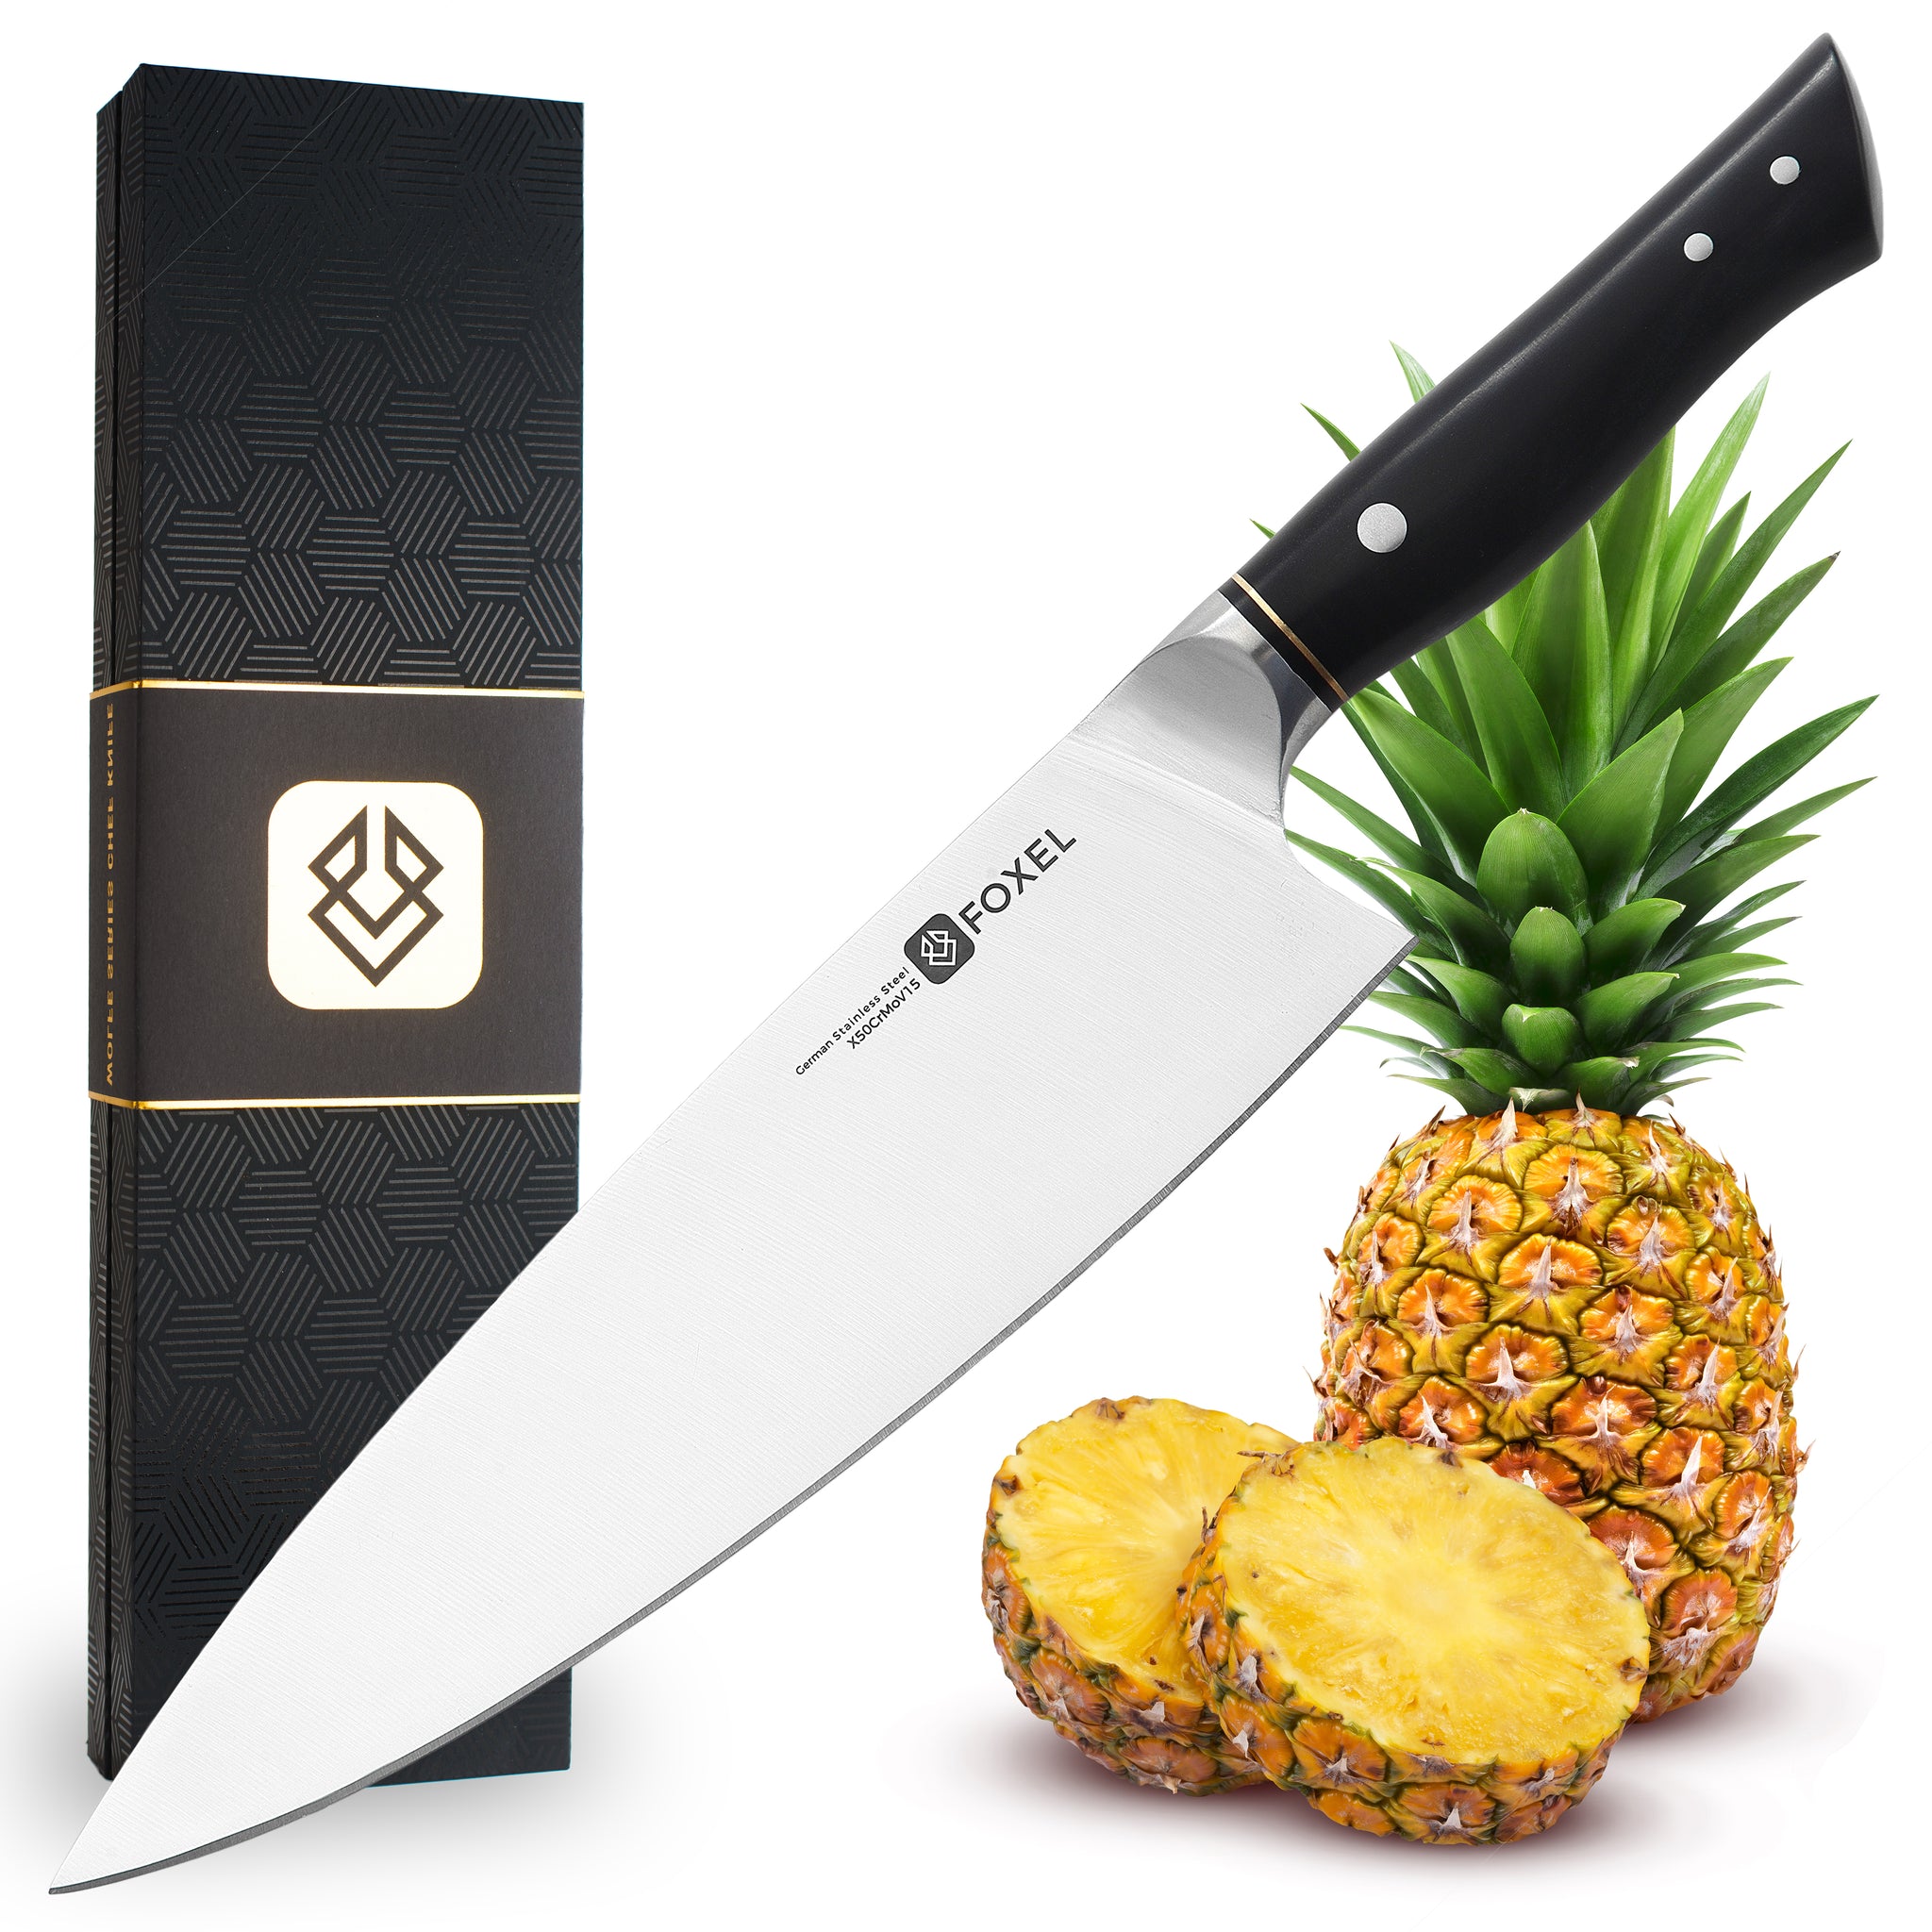 Kitchen Knives Every Professional Chef & Cook NEED In Their Kit 